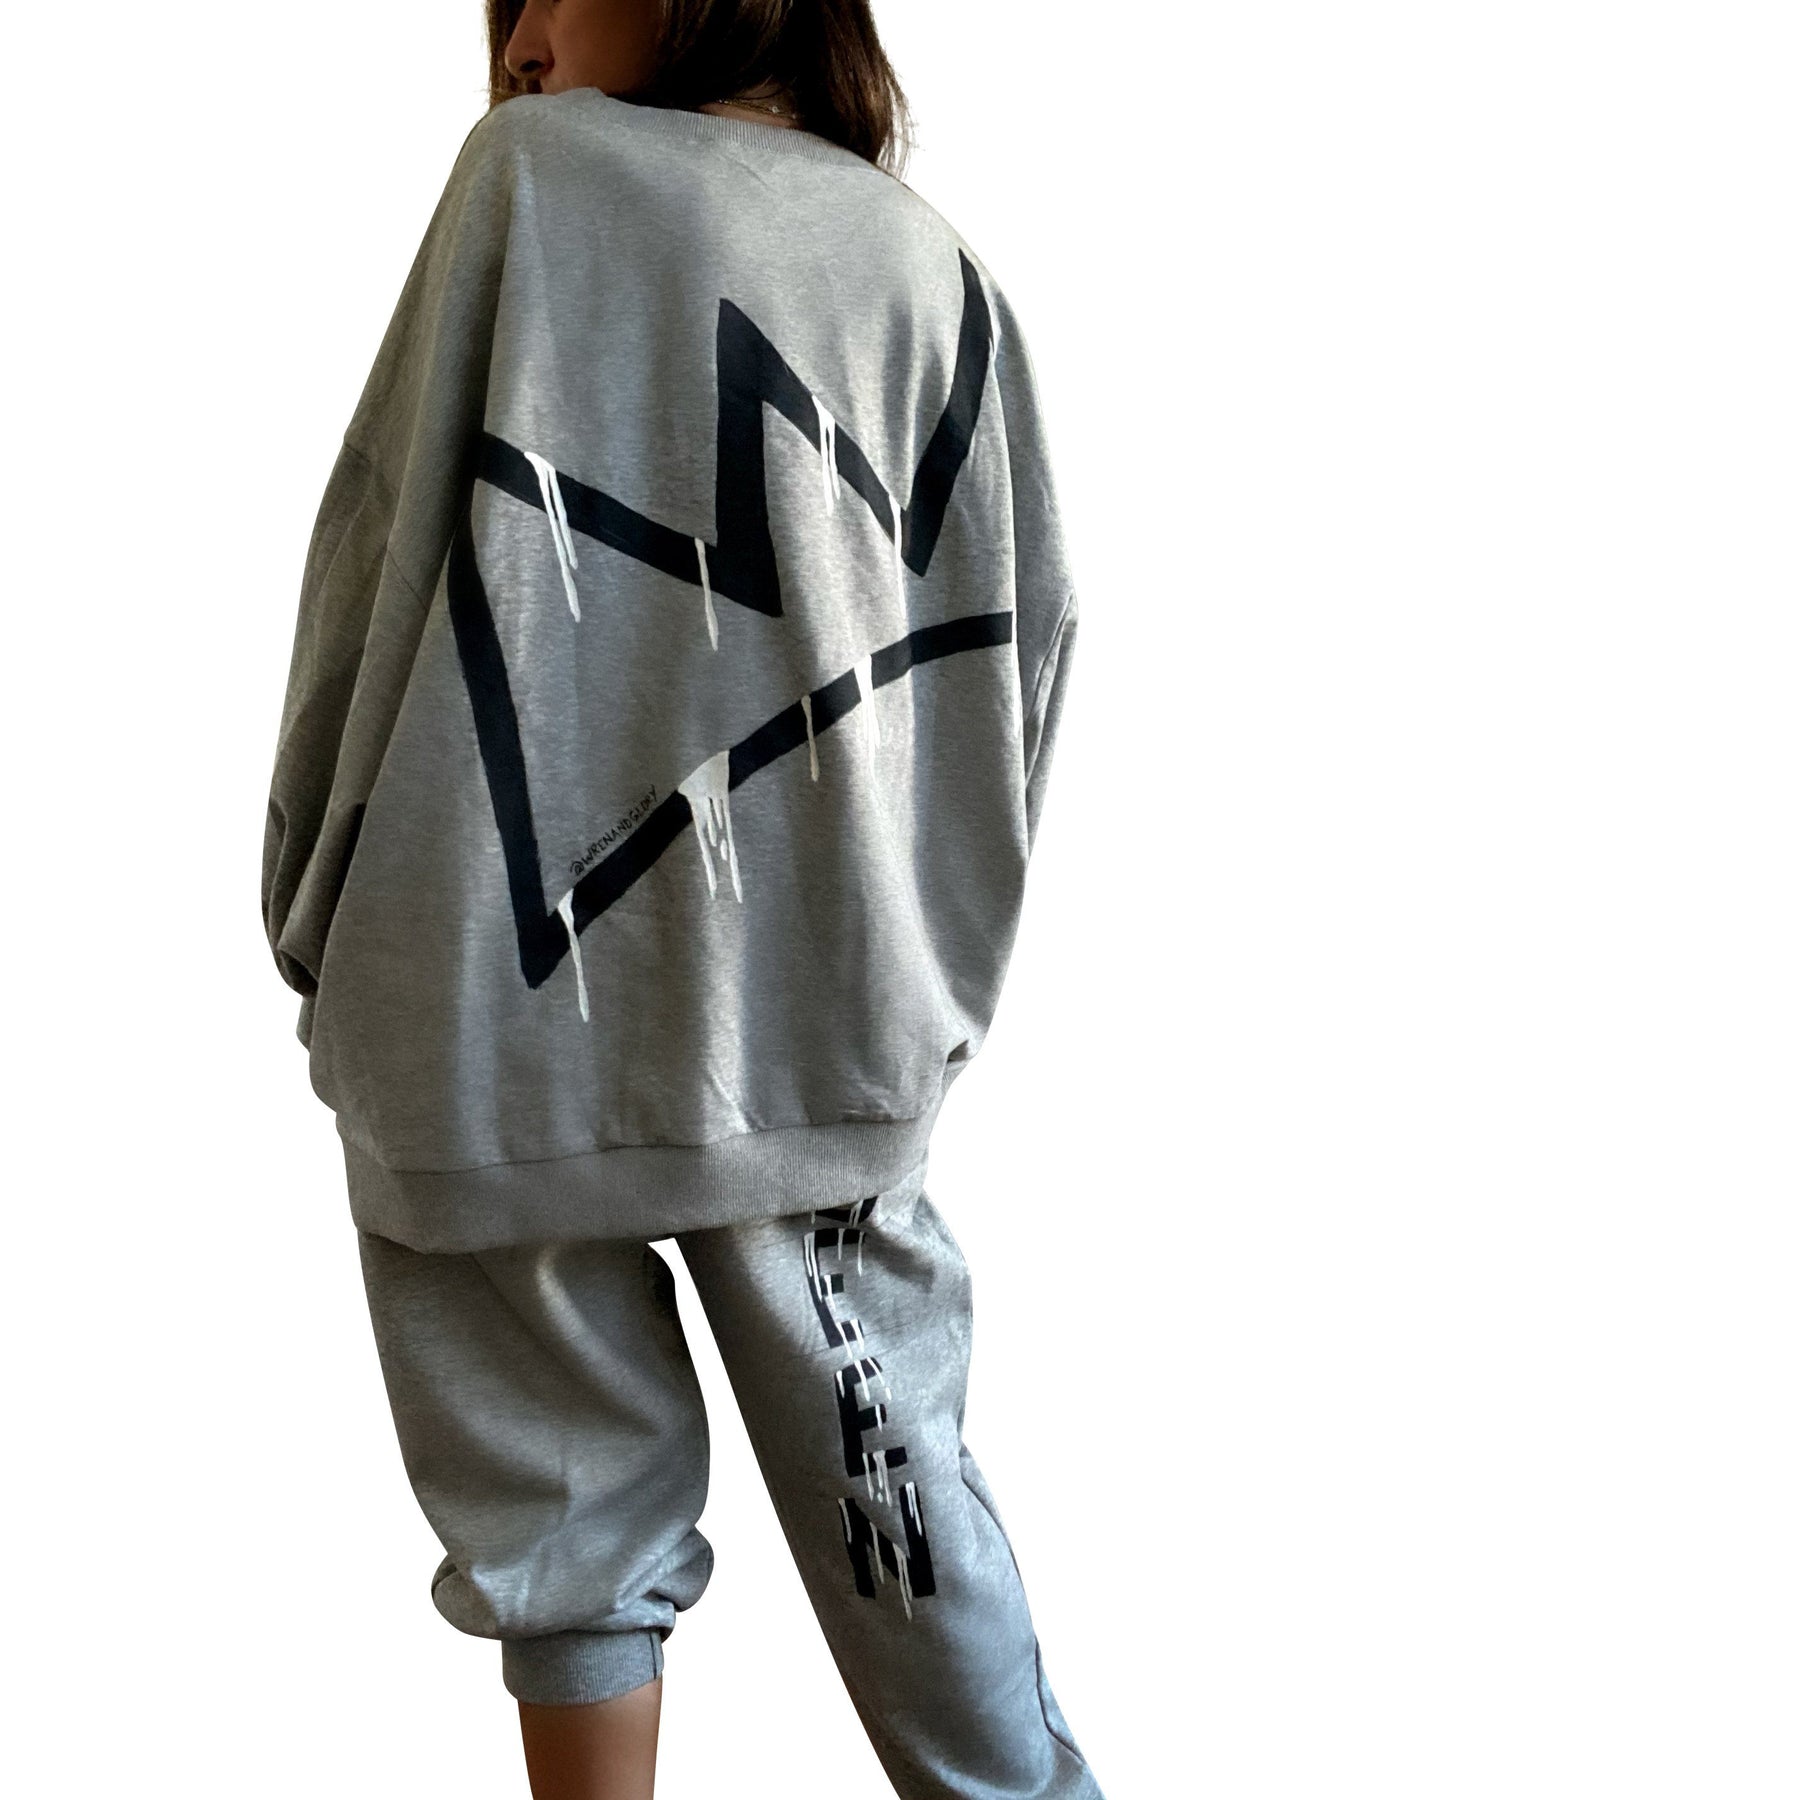 The perfect oversized sweatshirt & jogger loungewear set. TOP: Large crown painted on back in black, with white paint drips. QUEEN painted in black, on front left chest. BOTTOM: QUEEN painted on back going down leg in black, with white paint drips. Assorted sized crowns painted in black and white on front. Signed @wrenandglory on both top and bottom.